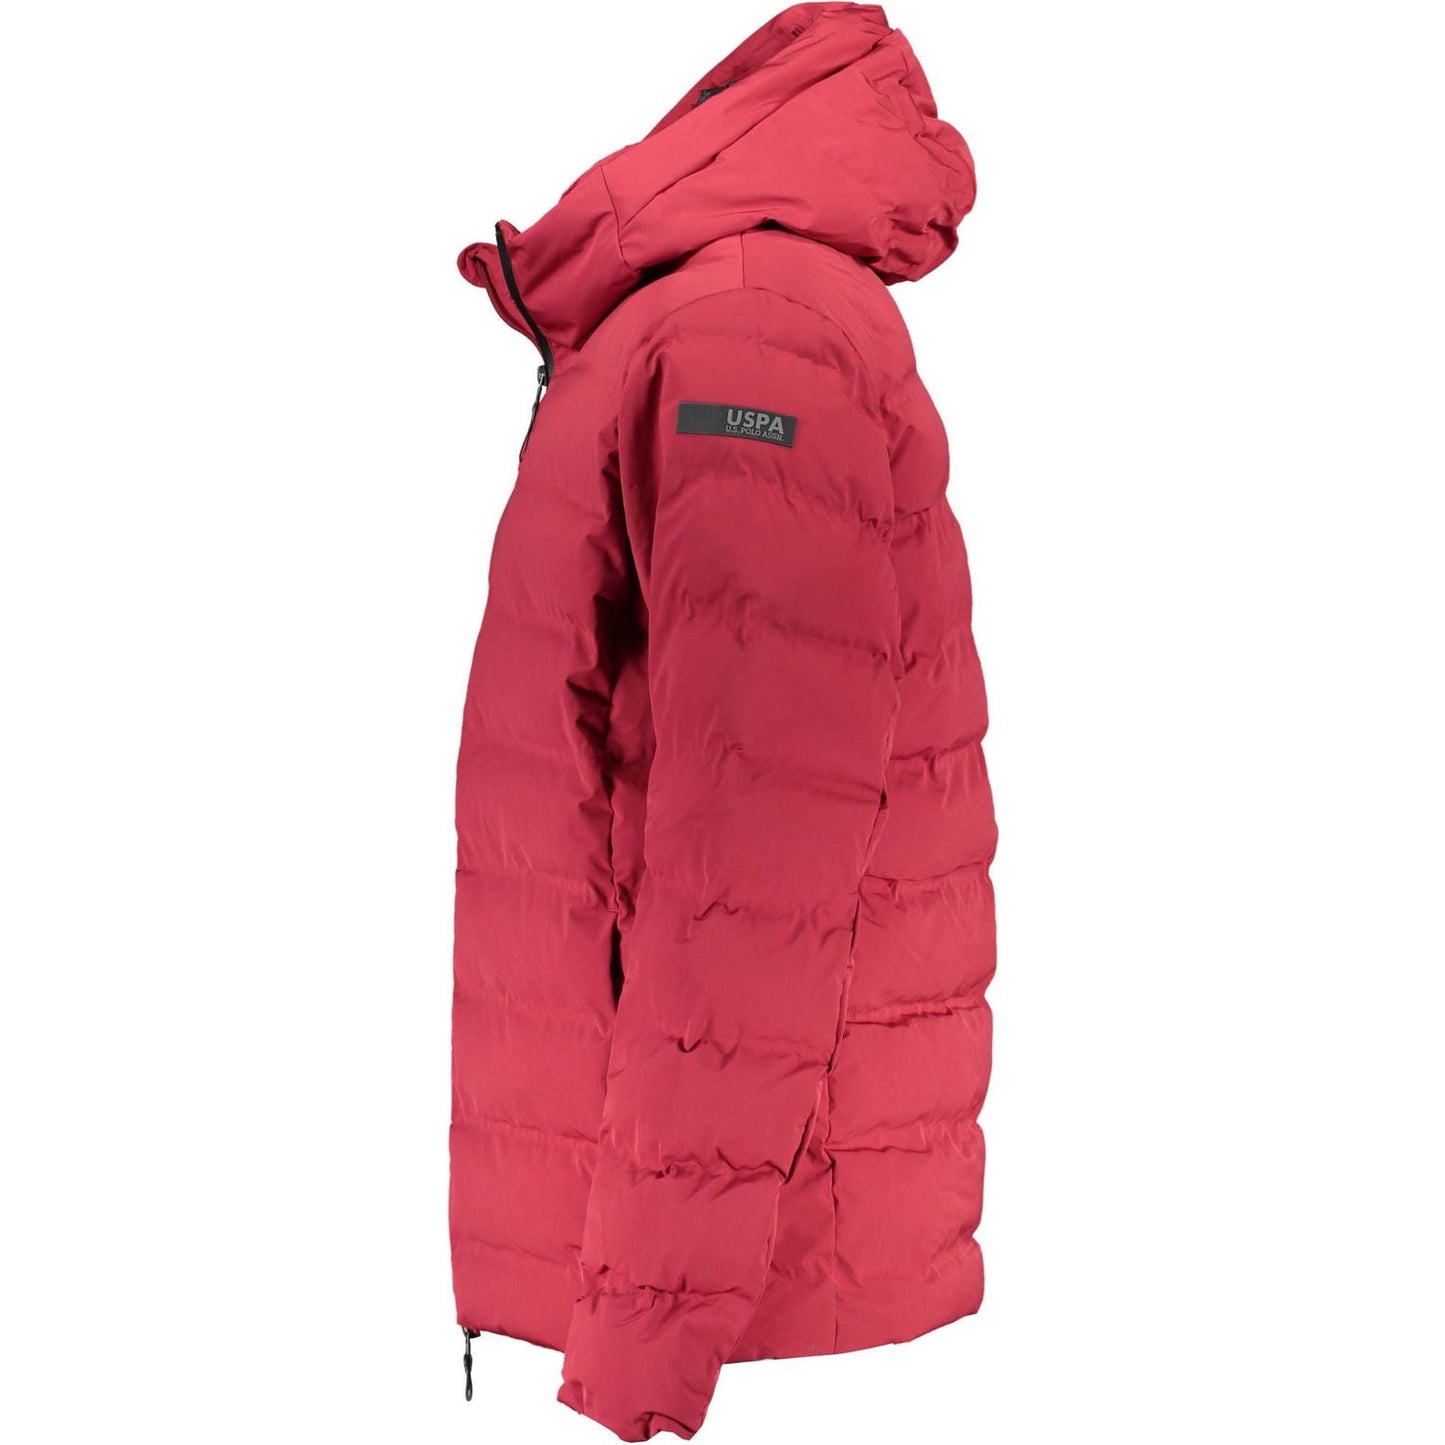 U.S. POLO ASSN. Chic Pink Hooded Jacket with Contrasting Details chic-pink-hooded-jacket-with-contrasting-details